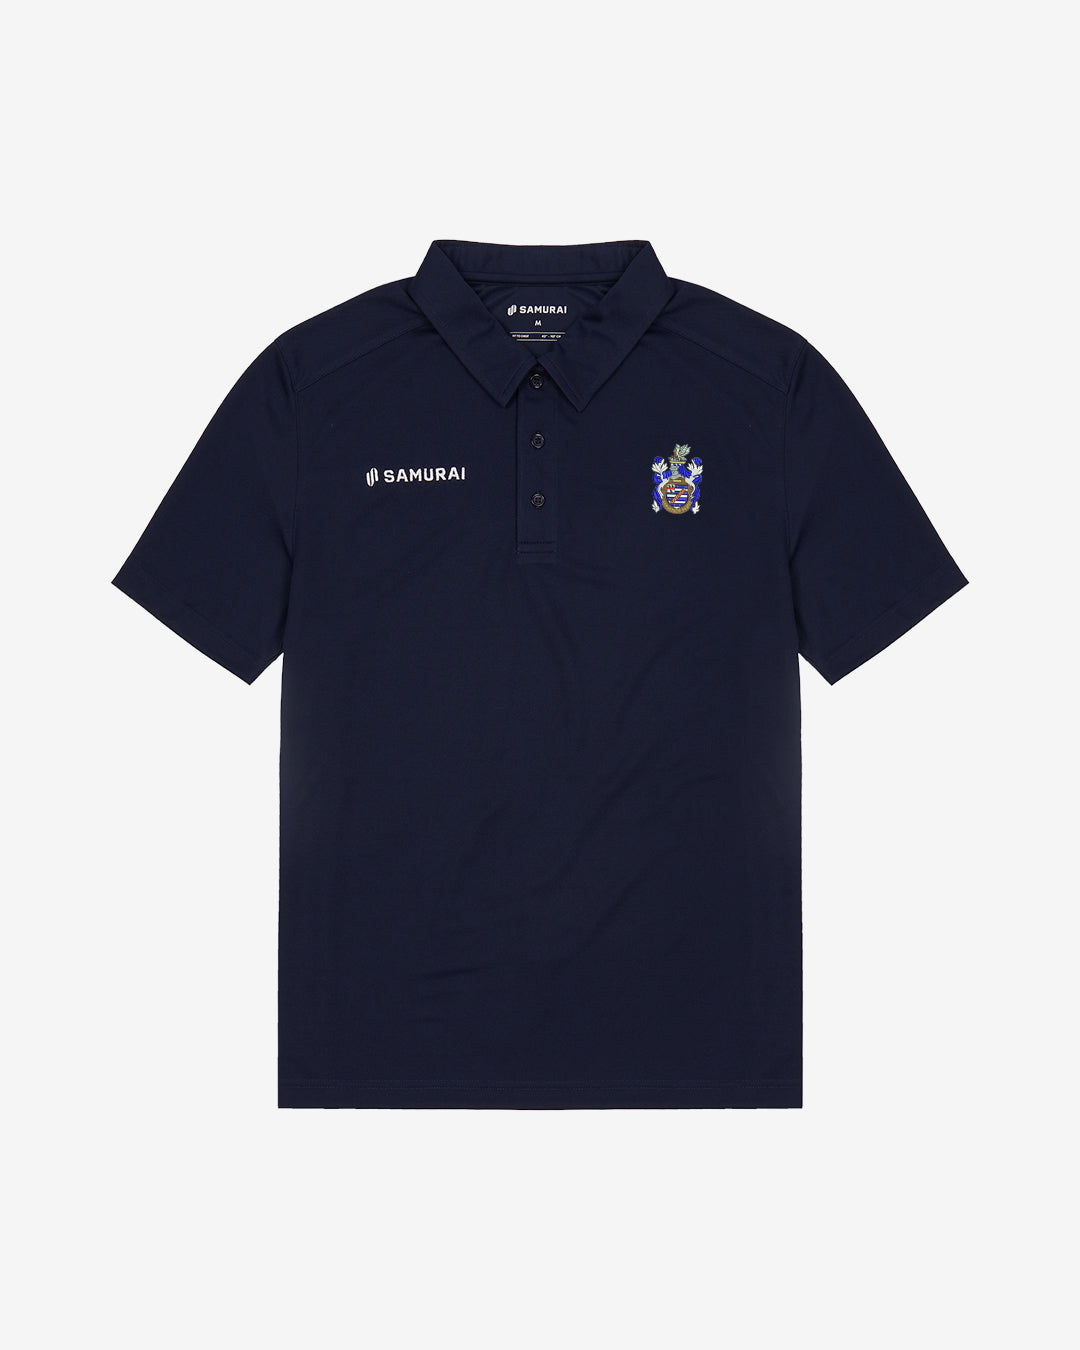 Skegness Rugby Club - EP:0111 - Performance Polo 2.1 - Navy